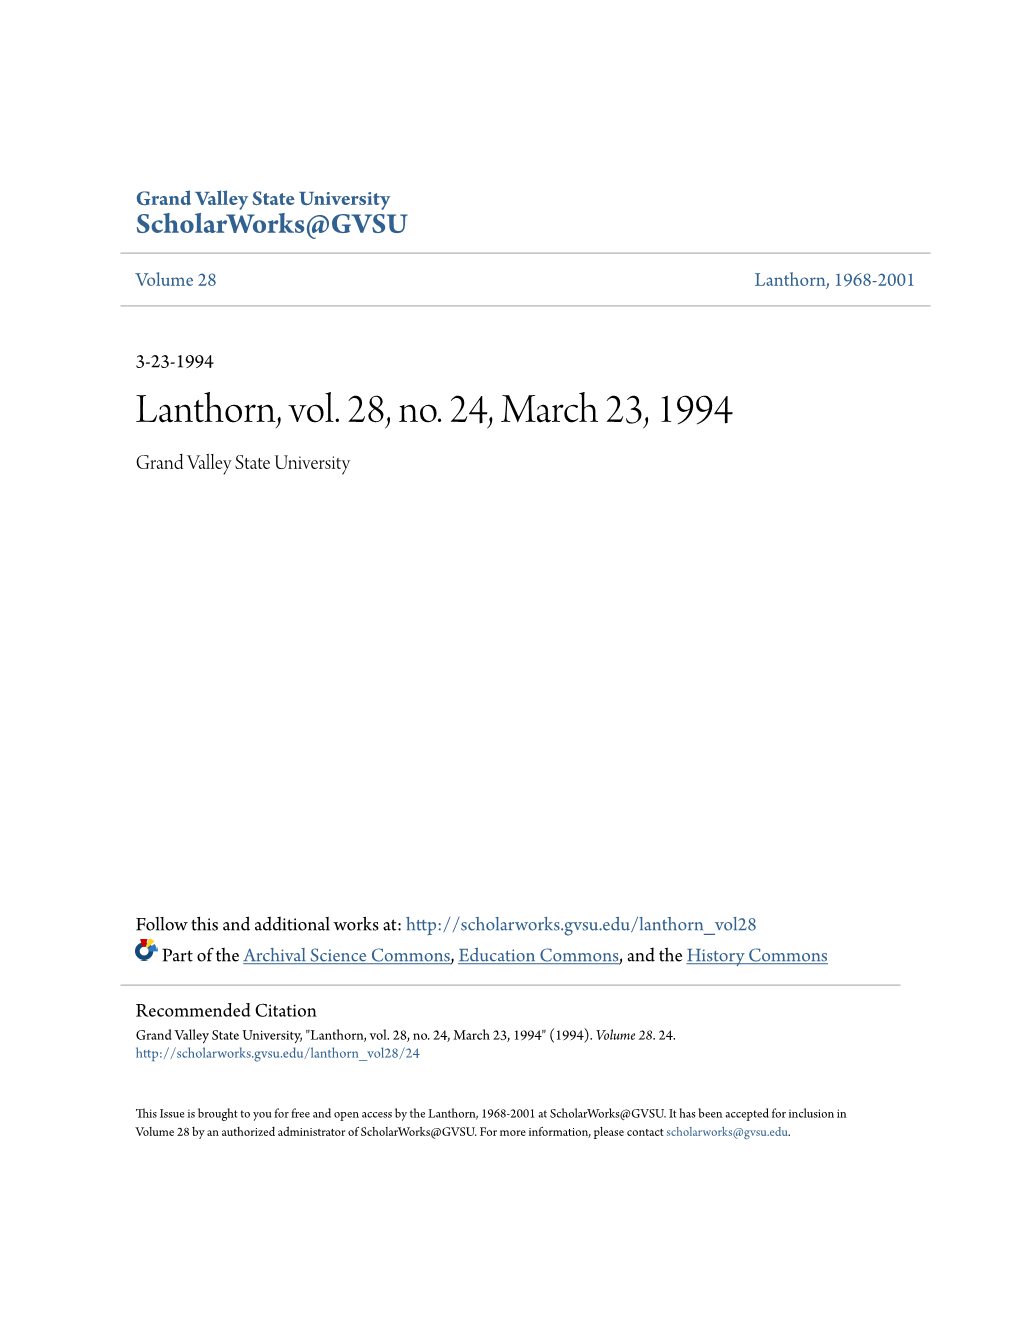 Lanthorn, Vol. 28, No. 24, March 23, 1994 Grand Valley State University